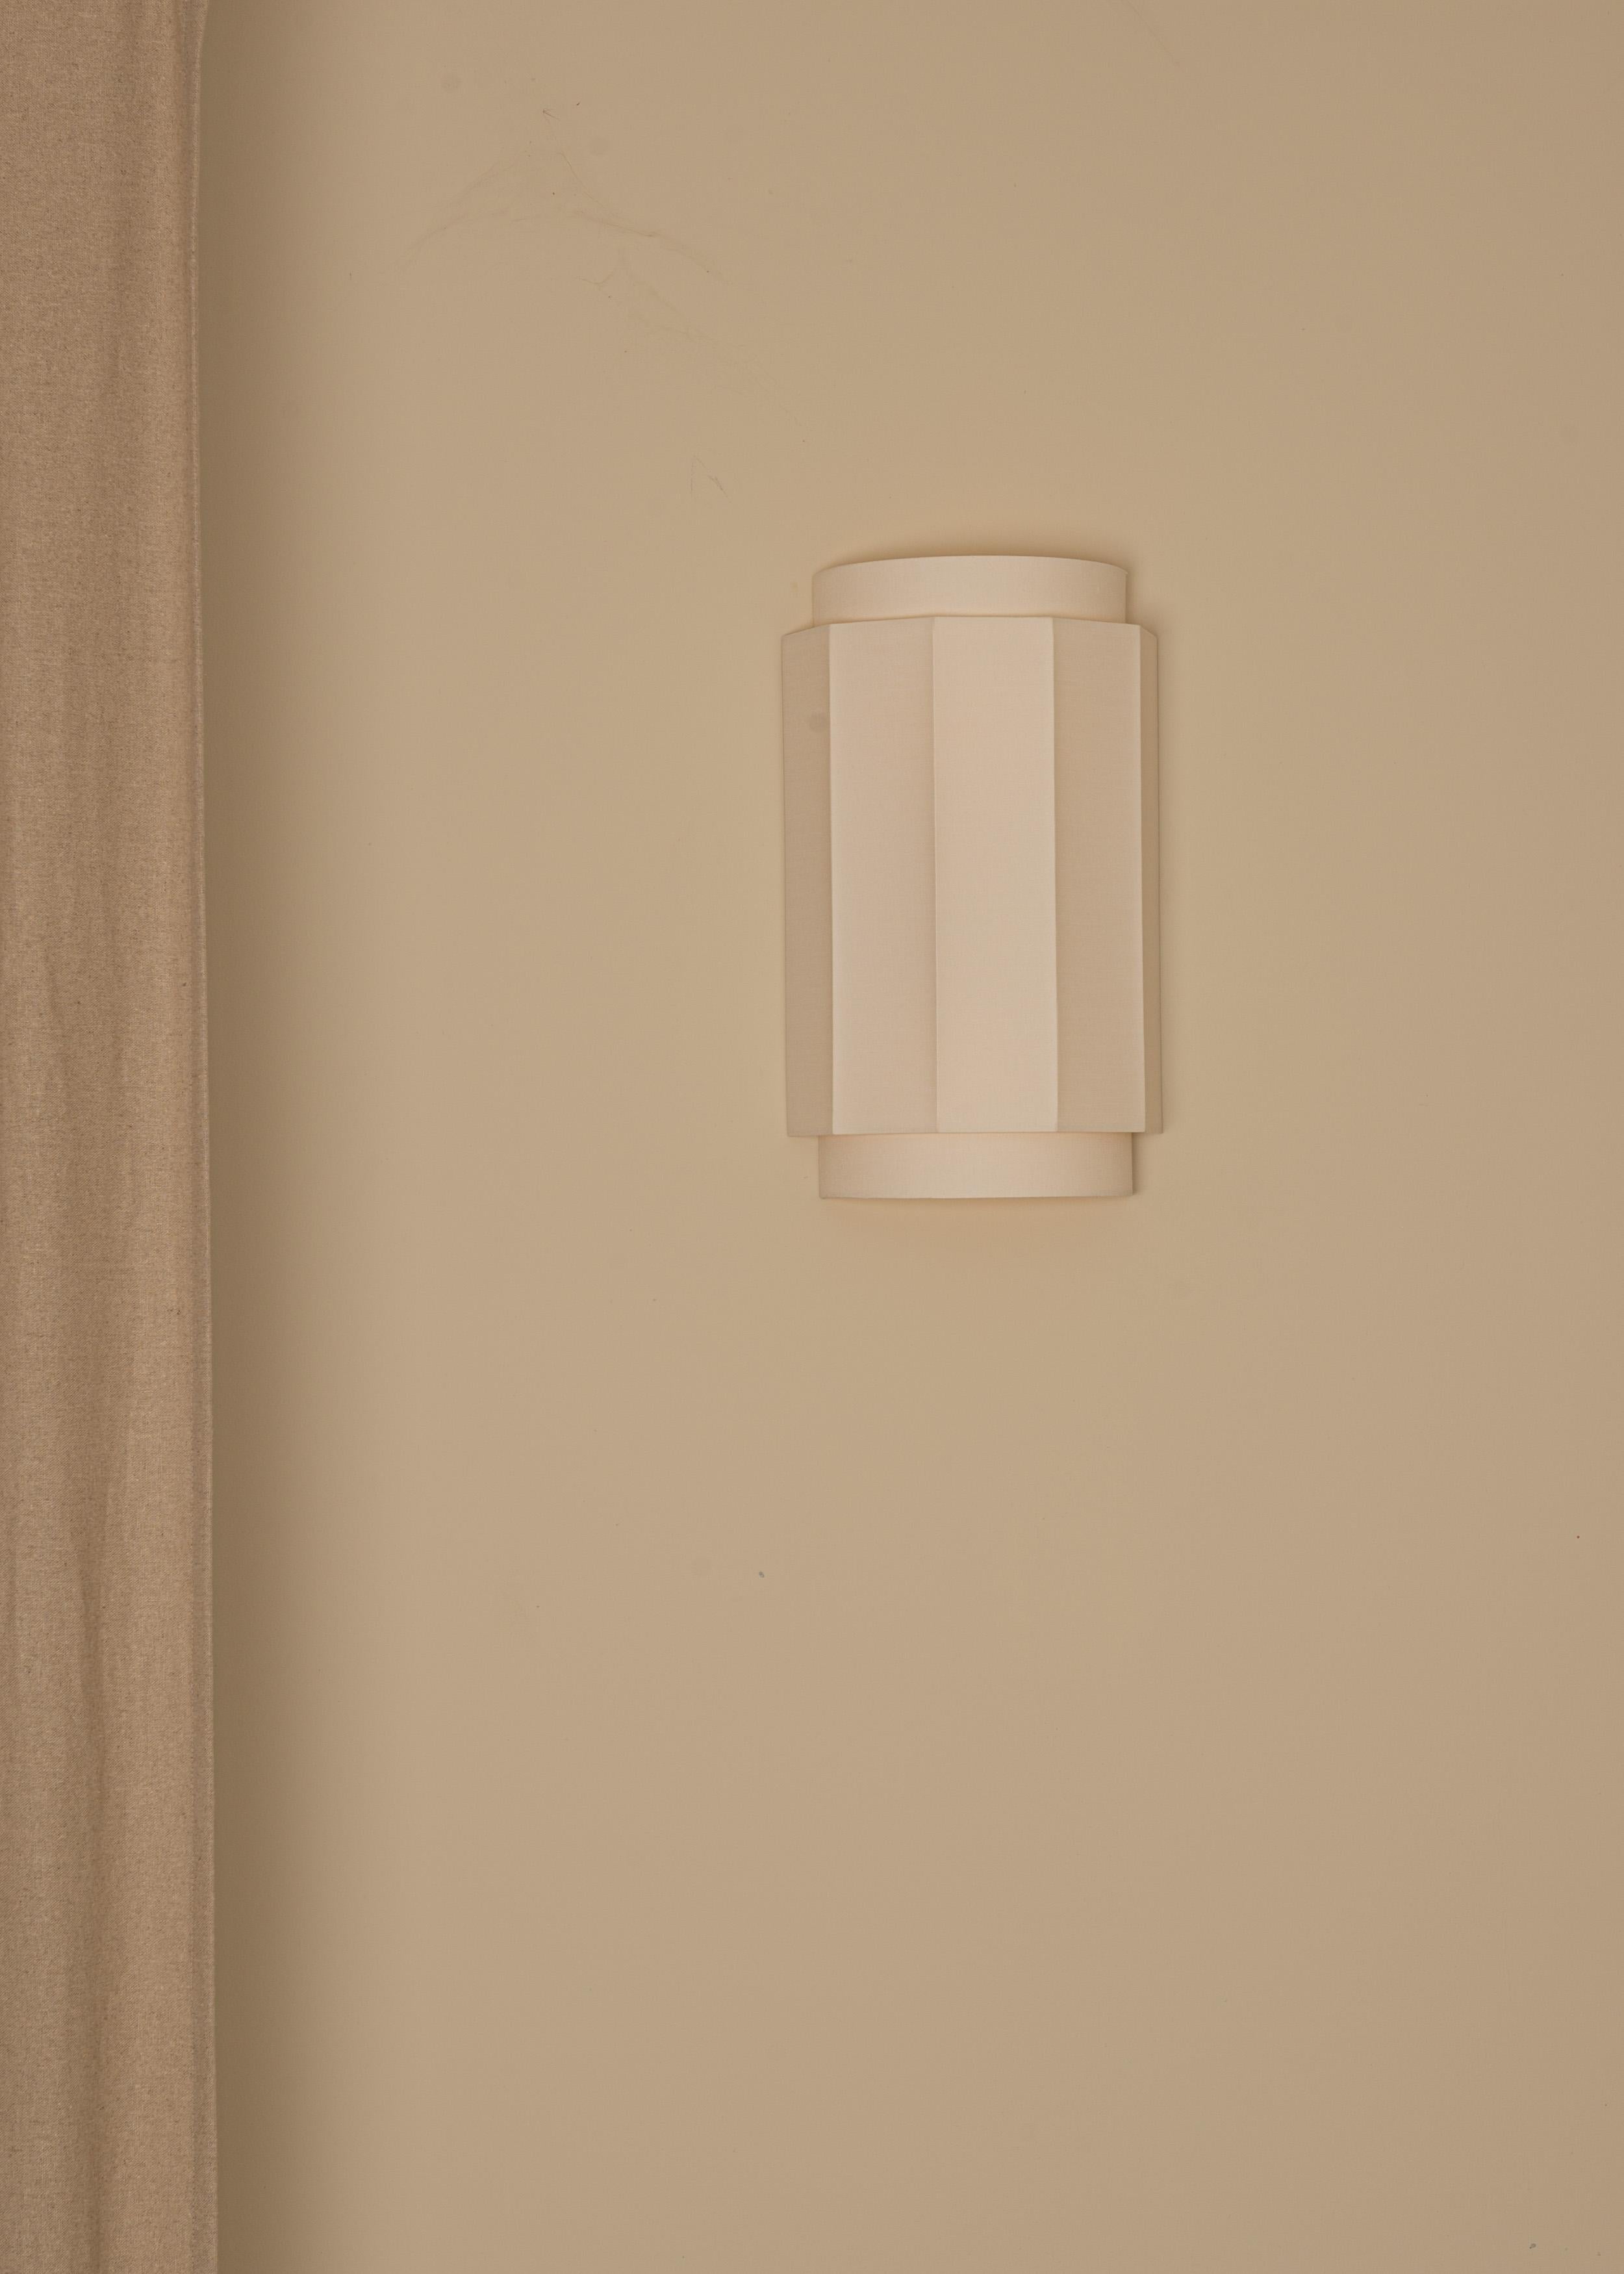 Geometries and superpositions creating a pure yet exceptional design. Okla is a wall light bringing purity and minimalism letting the light diffuses through a cotton double wall.